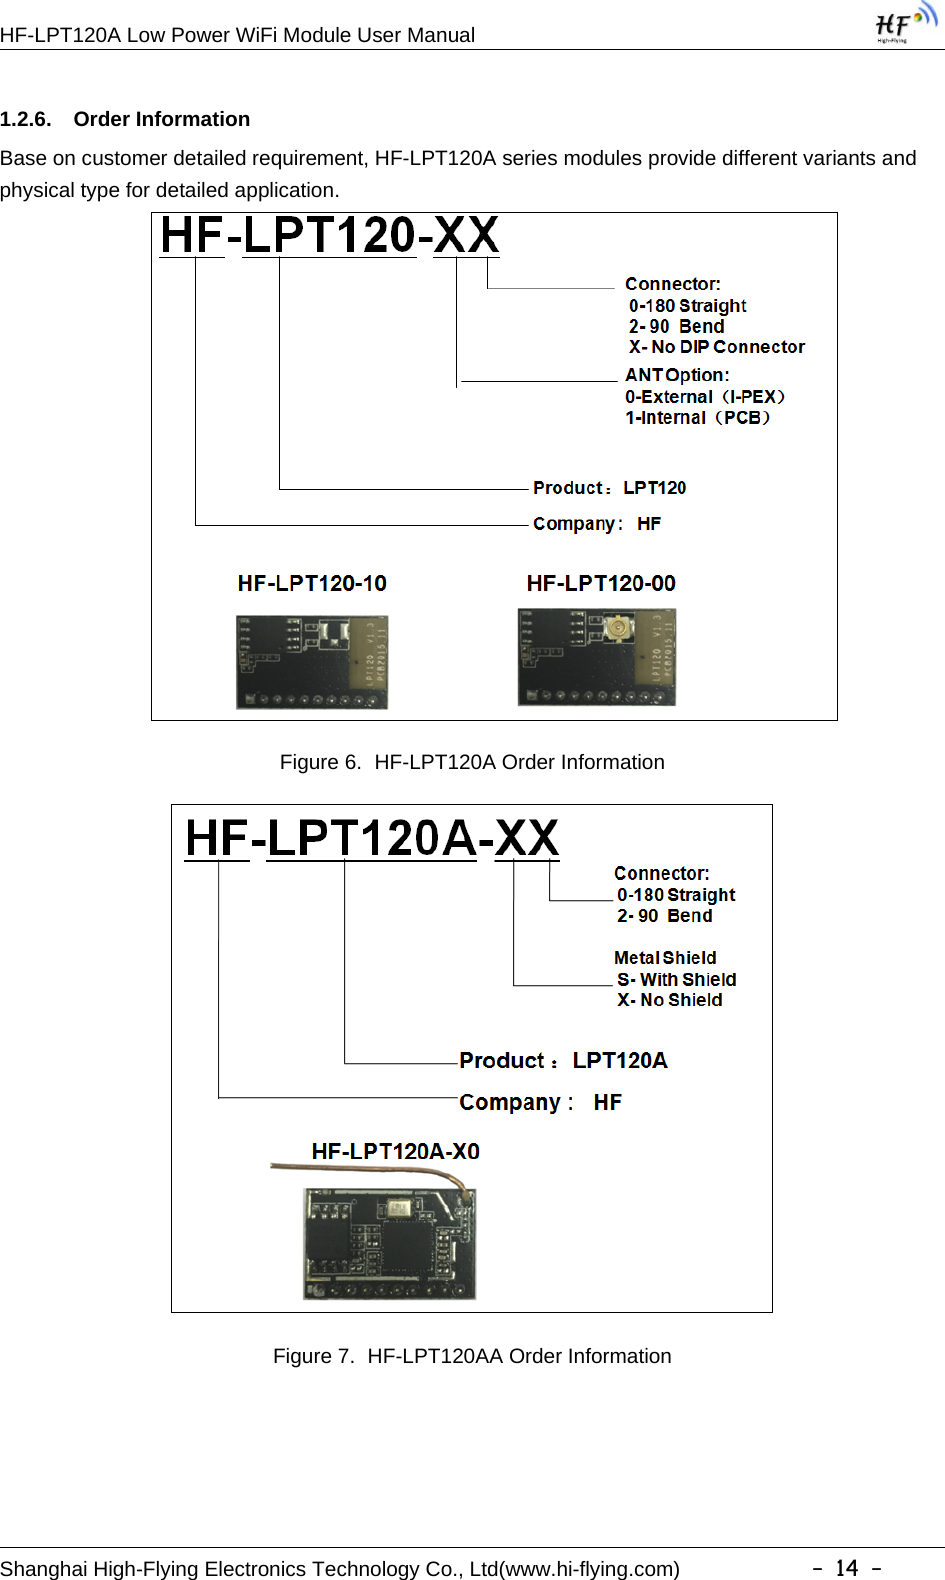 HF-LPT120A Low Power WiFi Module User ManualShanghai High-Flying Electronics Technology Co., Ltd(www.hi-flying.com) -14-1.2.6. Order InformationBase on customer detailed requirement, HF-LPT120A series modules provide different variants andphysical type for detailed application.Figure 6. HF-LPT120A Order InformationFigure 7. HF-LPT120AA Order Information